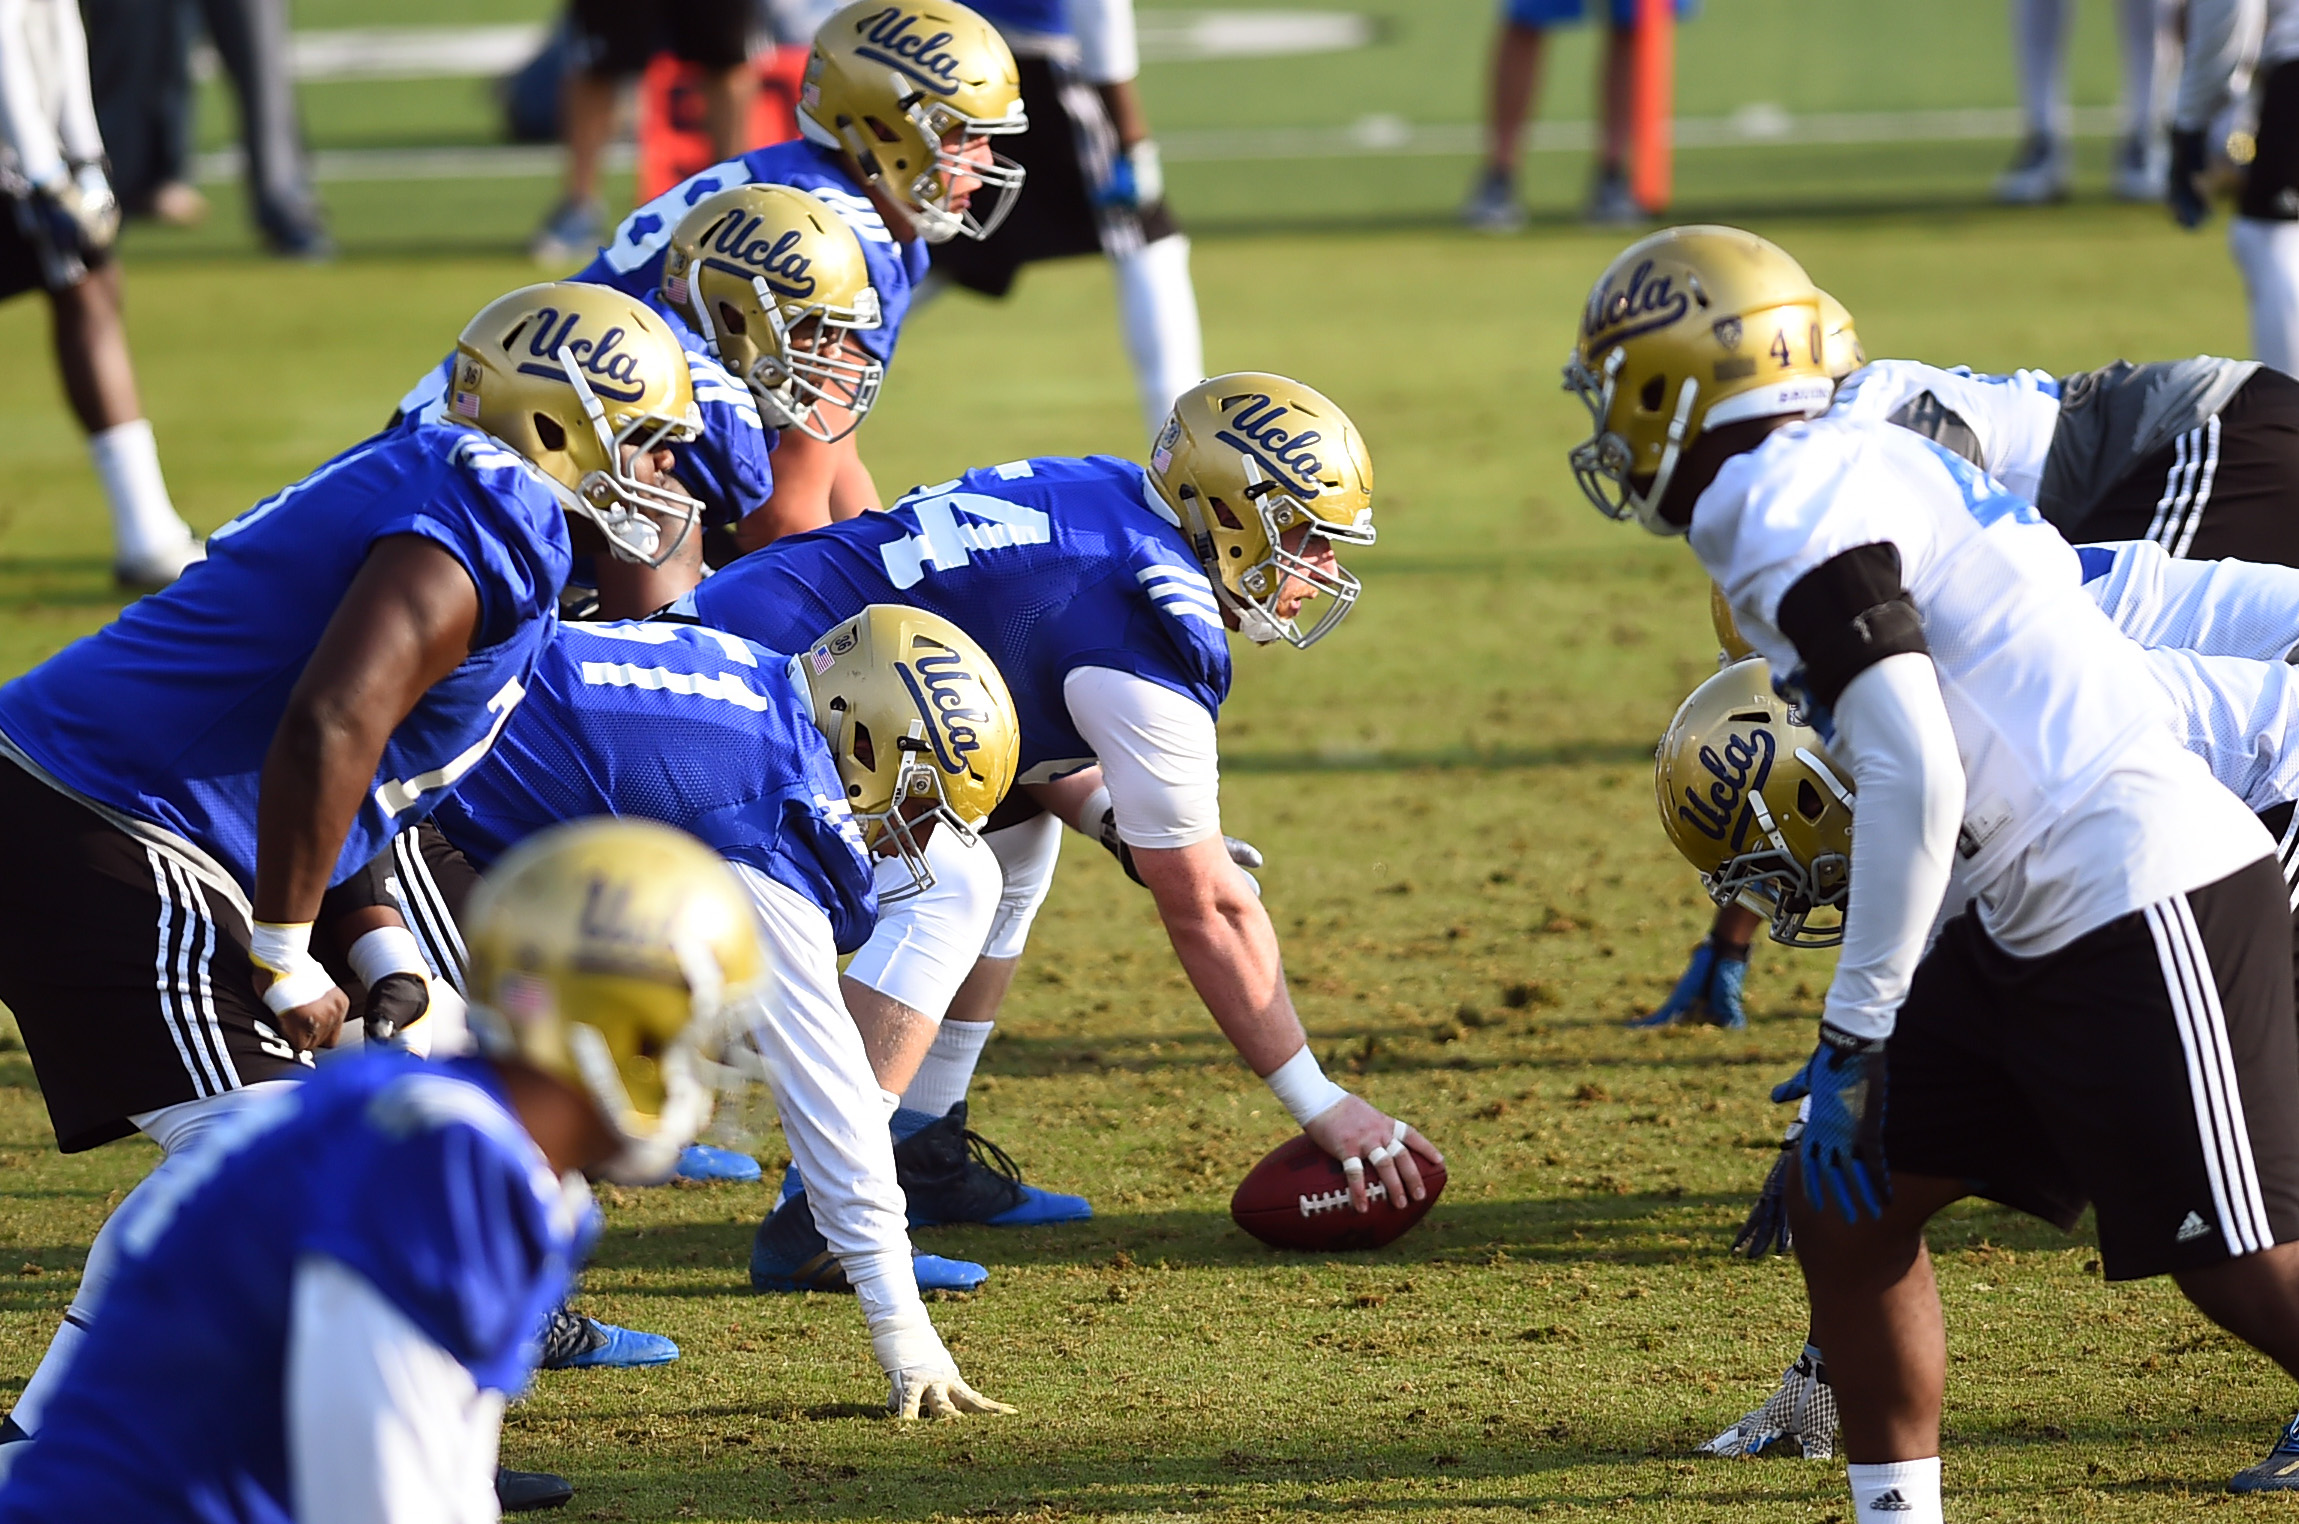 UCLA's offensive line during spring football practice at Spaulding Field on April 23, 2015. (Andy Holzman/Staff)